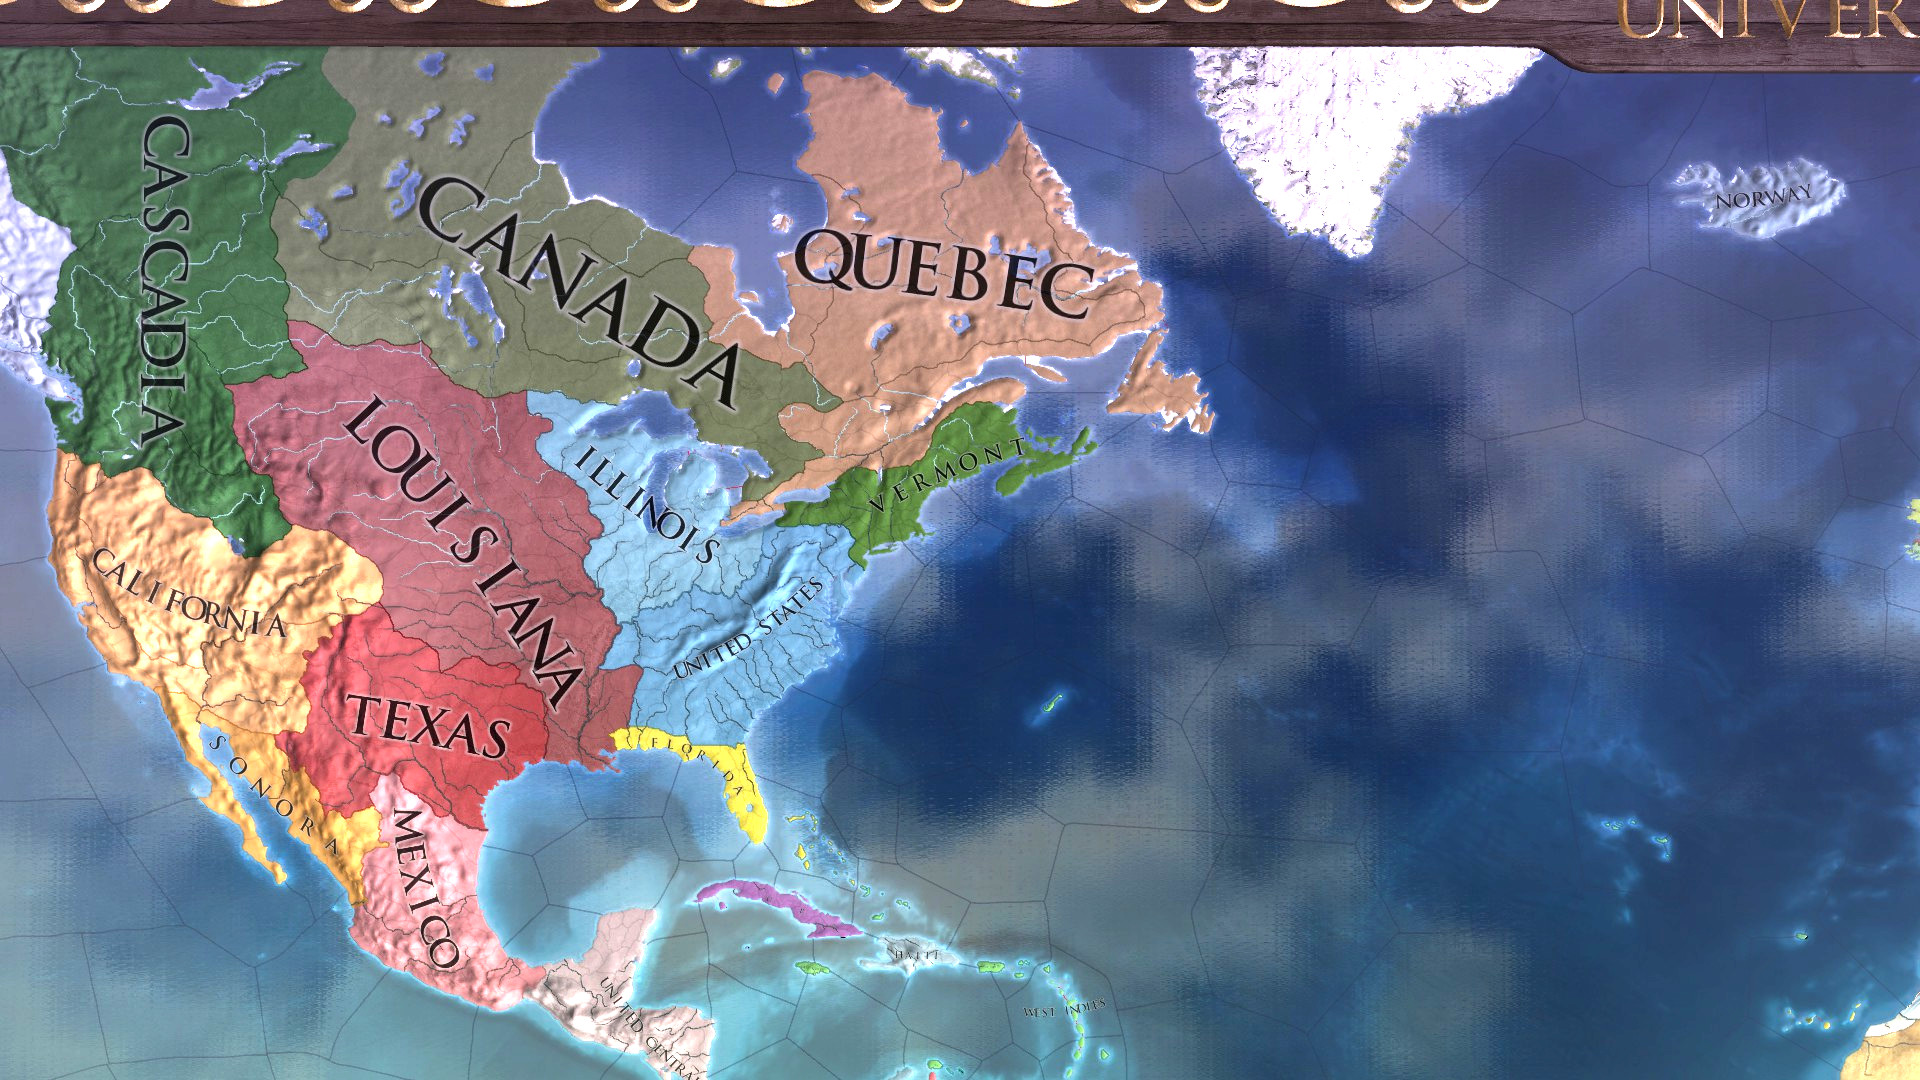 EU4 formable nations – a guide to creating new nations in Europa Universalis 4